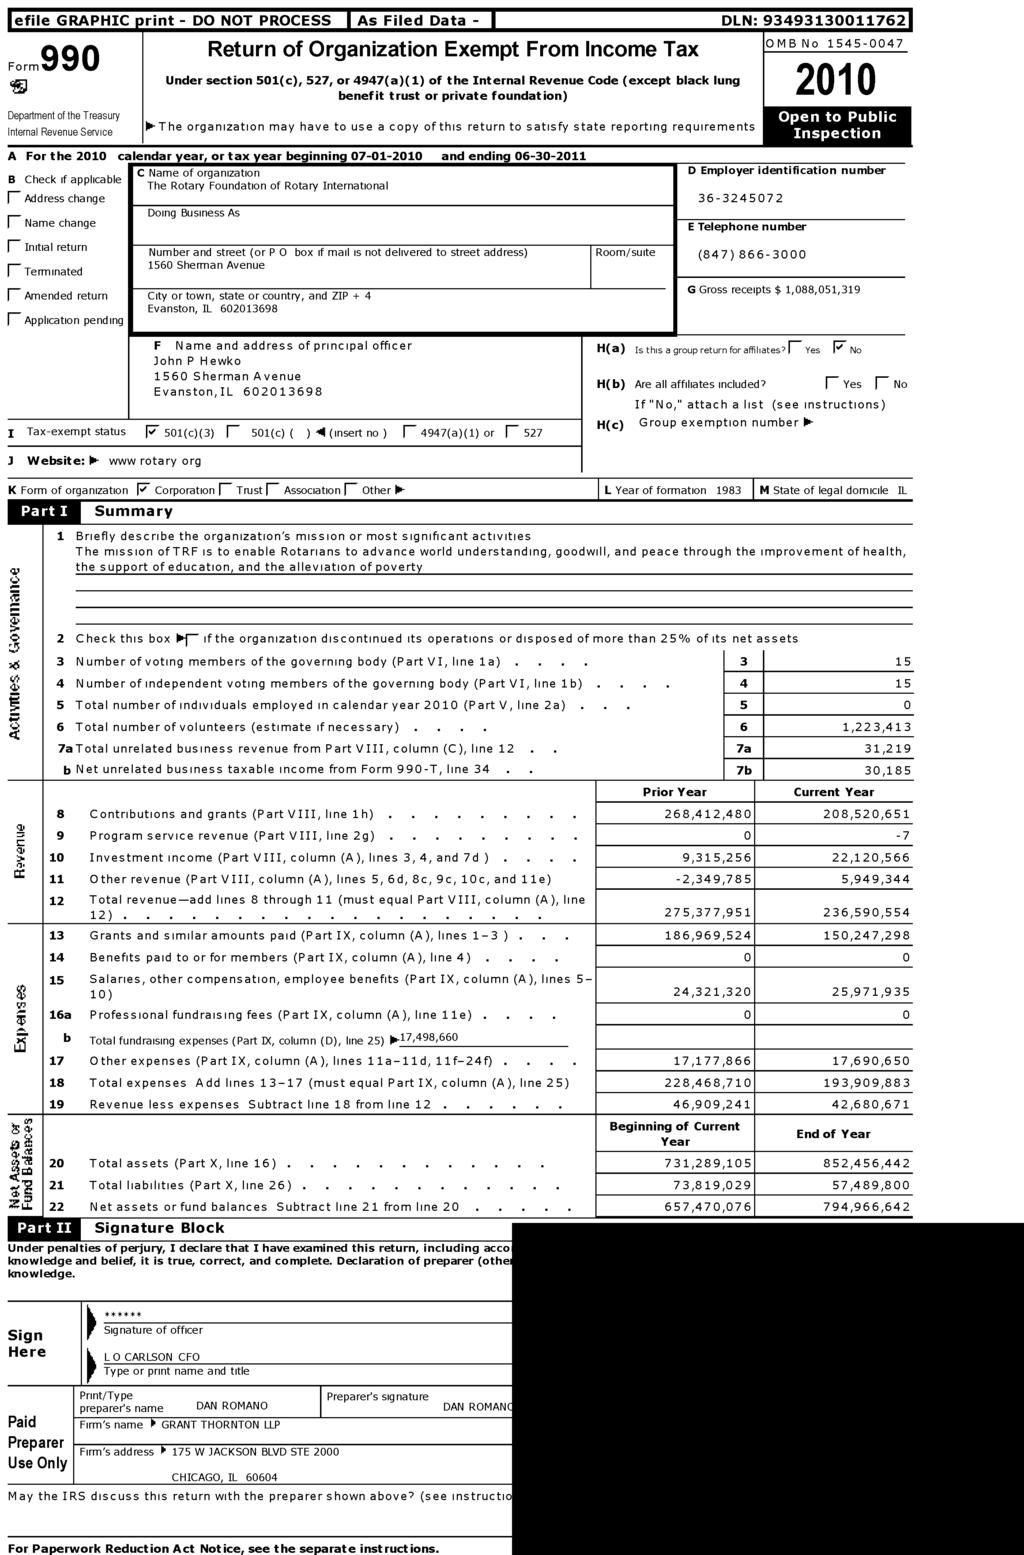 lefile GRAPHIC p rint - DO NOT PROCESS As Filed Data - DLN: 93493130011762 OMB No 1545-0047 Return of Organization Exempt From Income Tax Form 990 Under section 501 (c), 527, or 4947( a)(1) of the